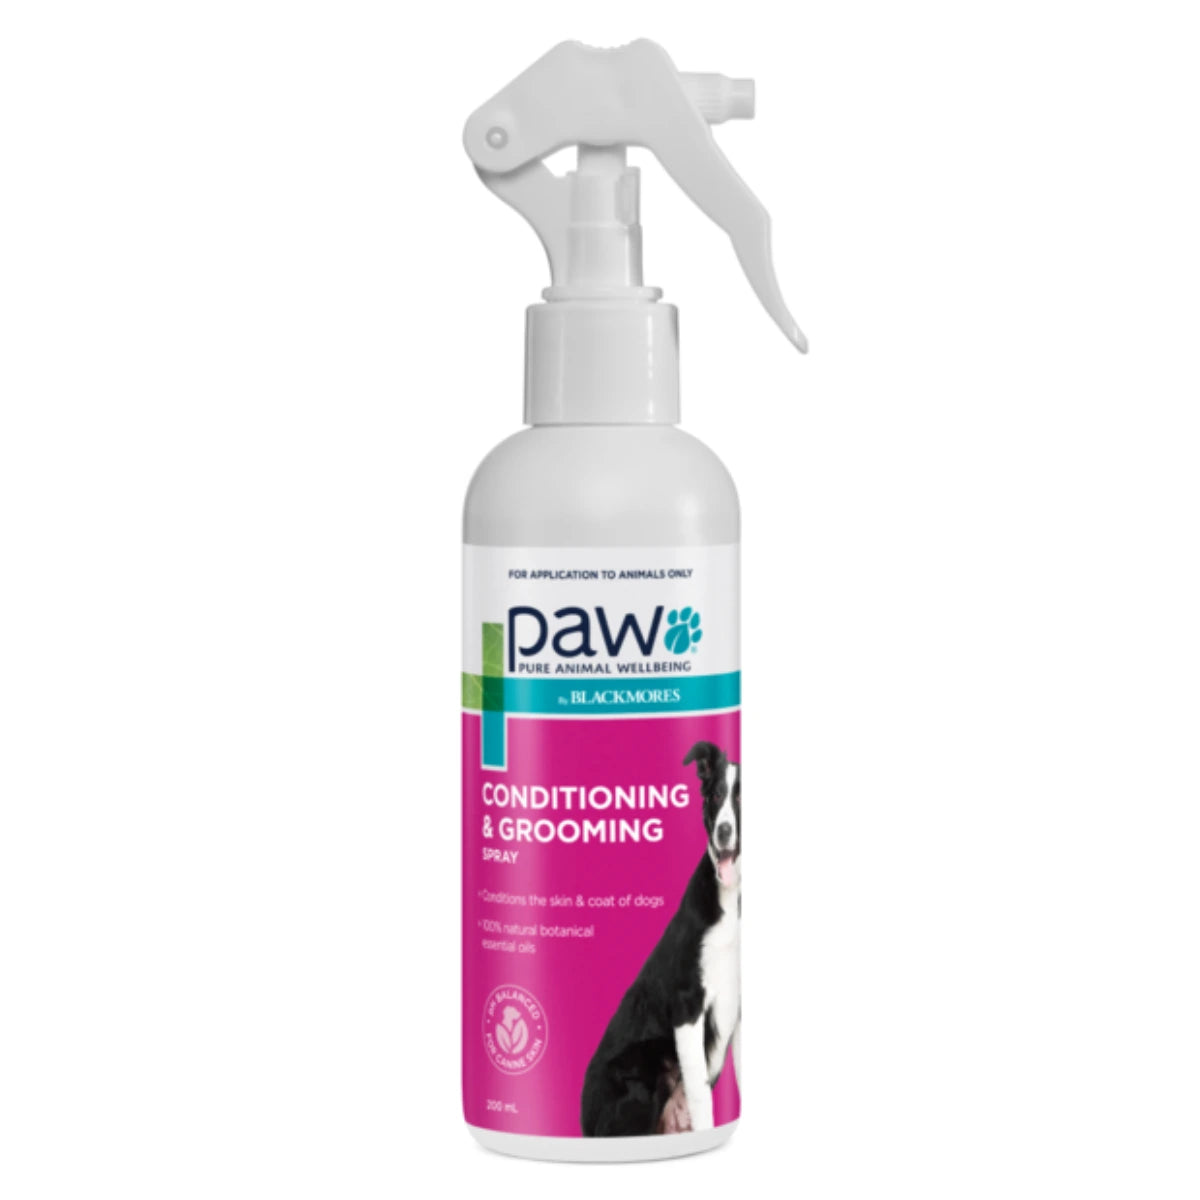 PAW - Conditional & Grooming Spray 200ml